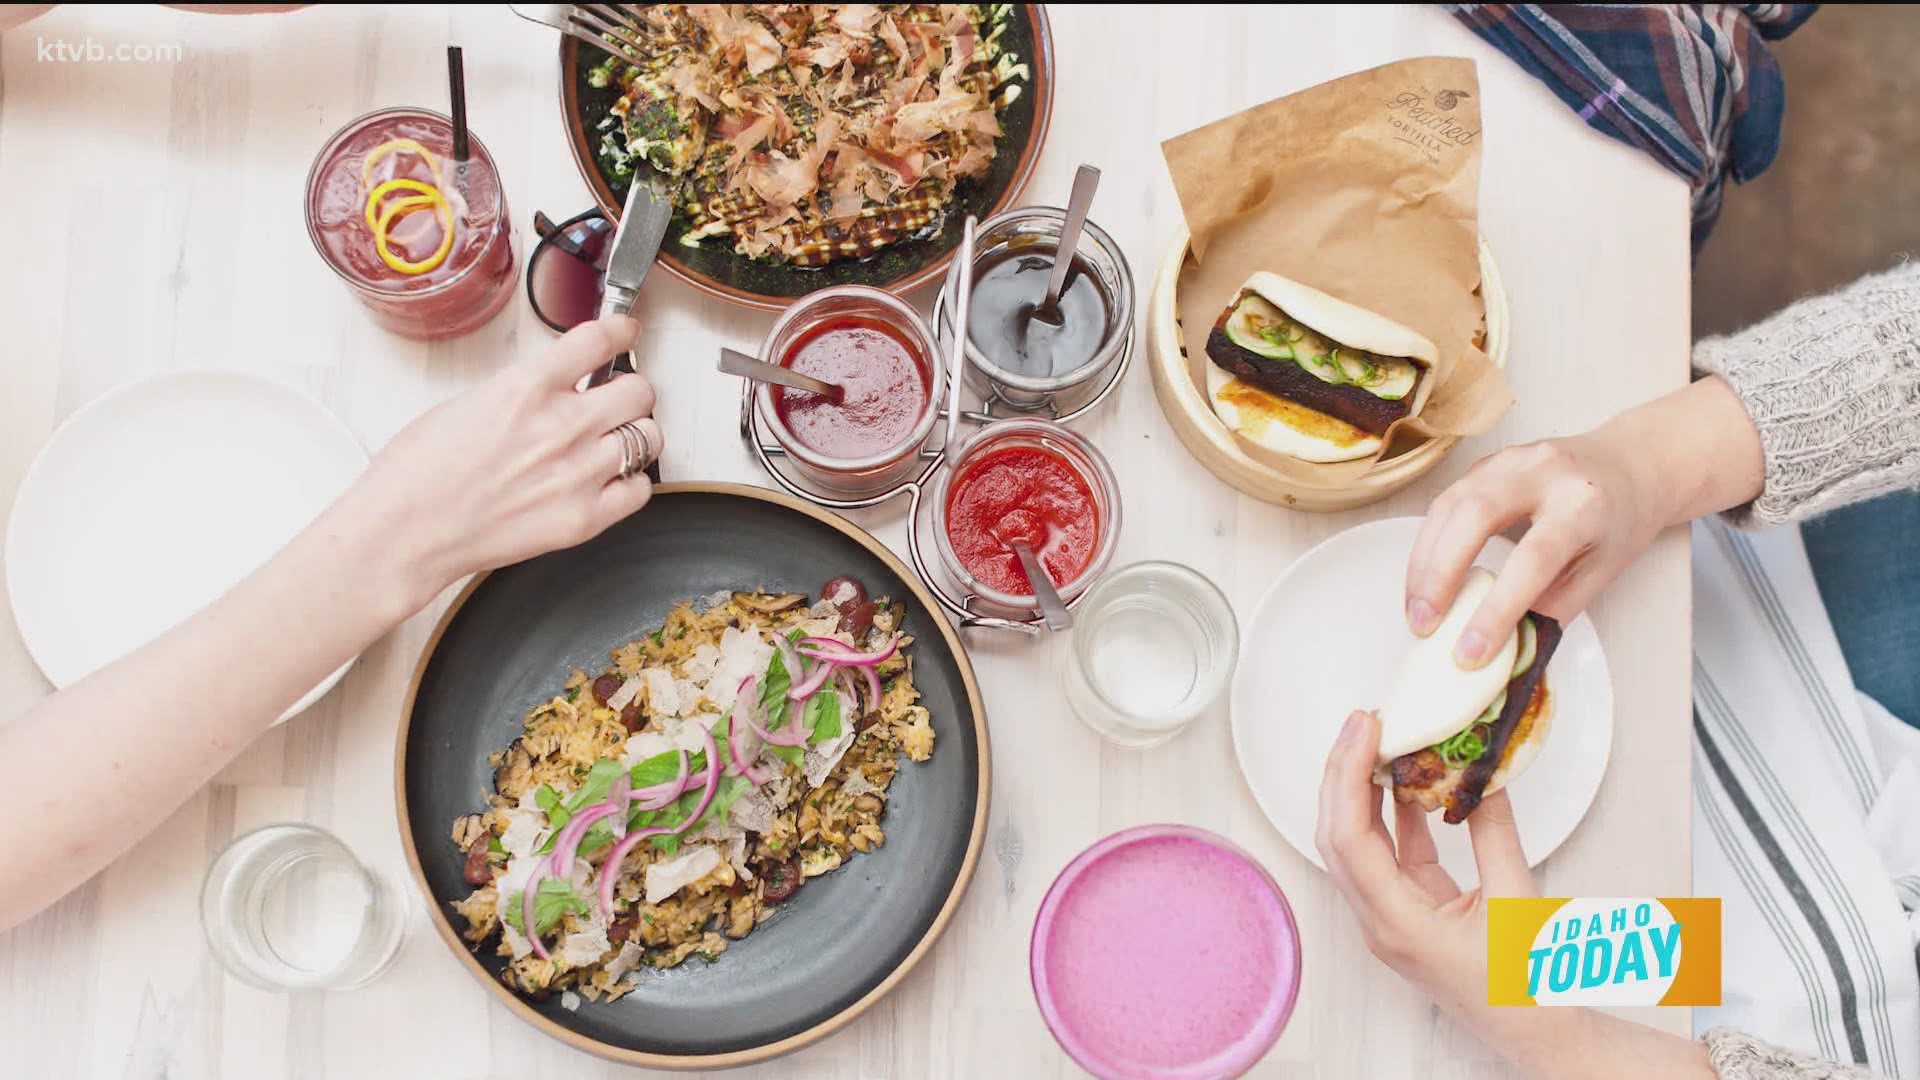 @boifood on Instagram shares delicious local holiday foods, from crazy desserts to tacos. Plus, he tells us about the new delivery service in the area, Crave.